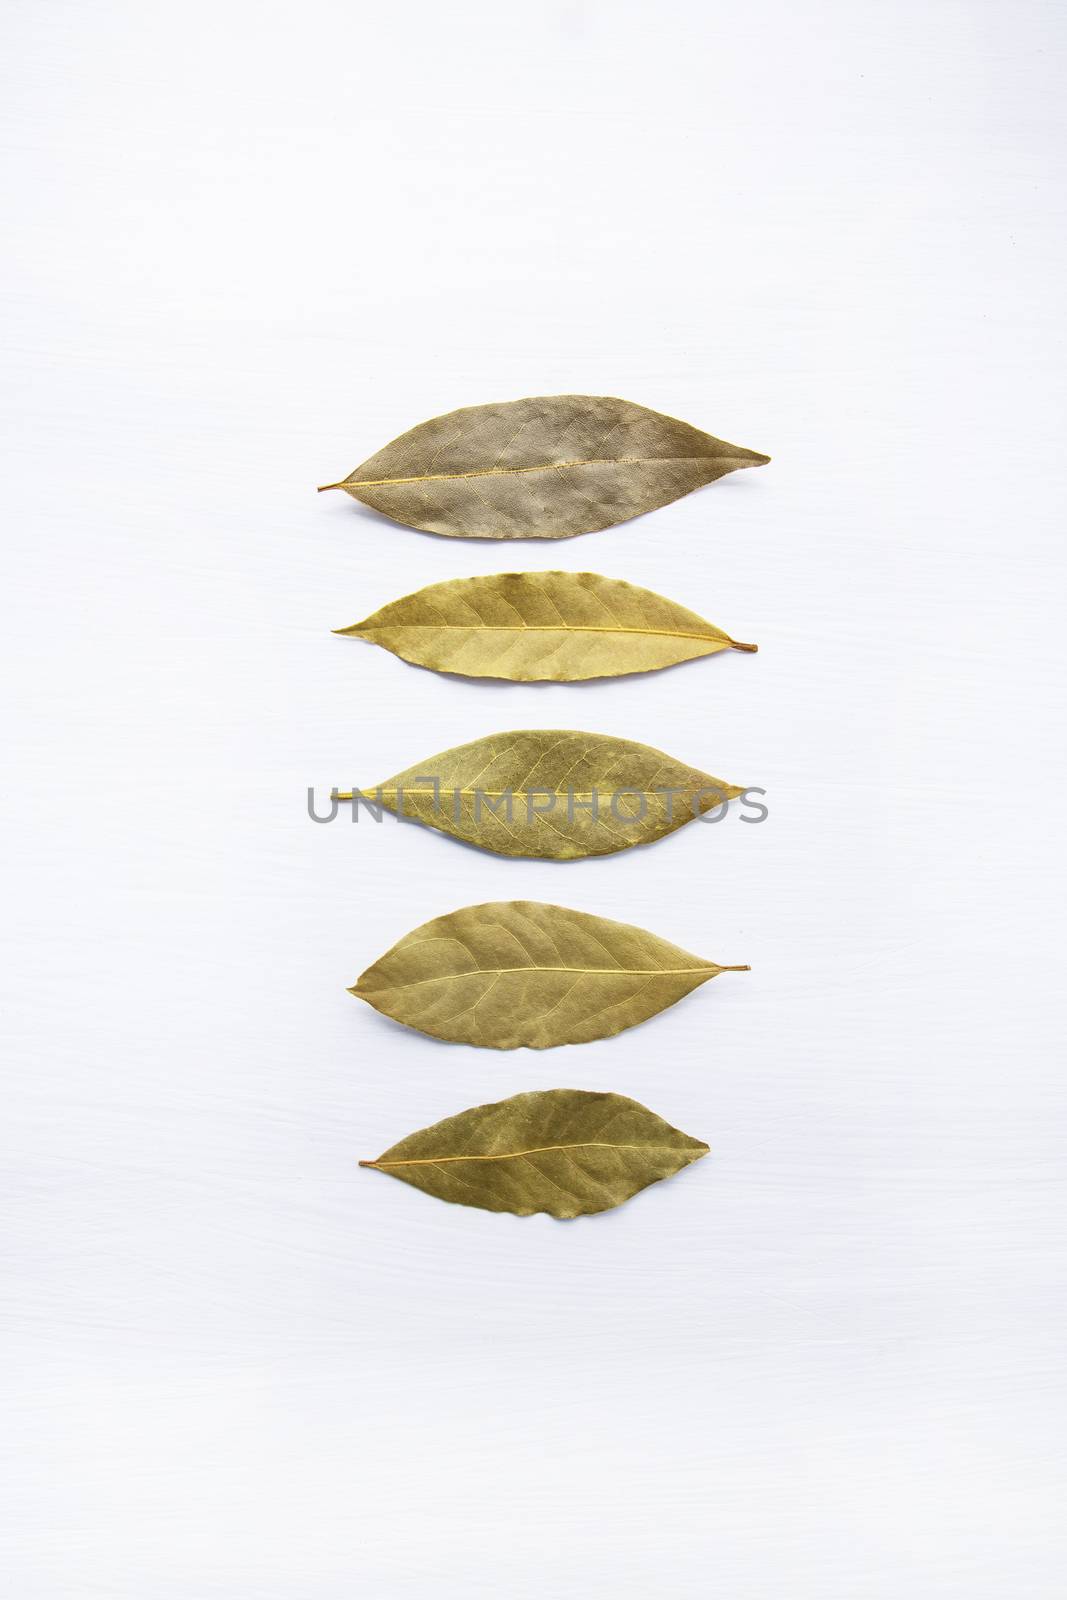 Dried bay leaves isolated on white wooden background with copy space.